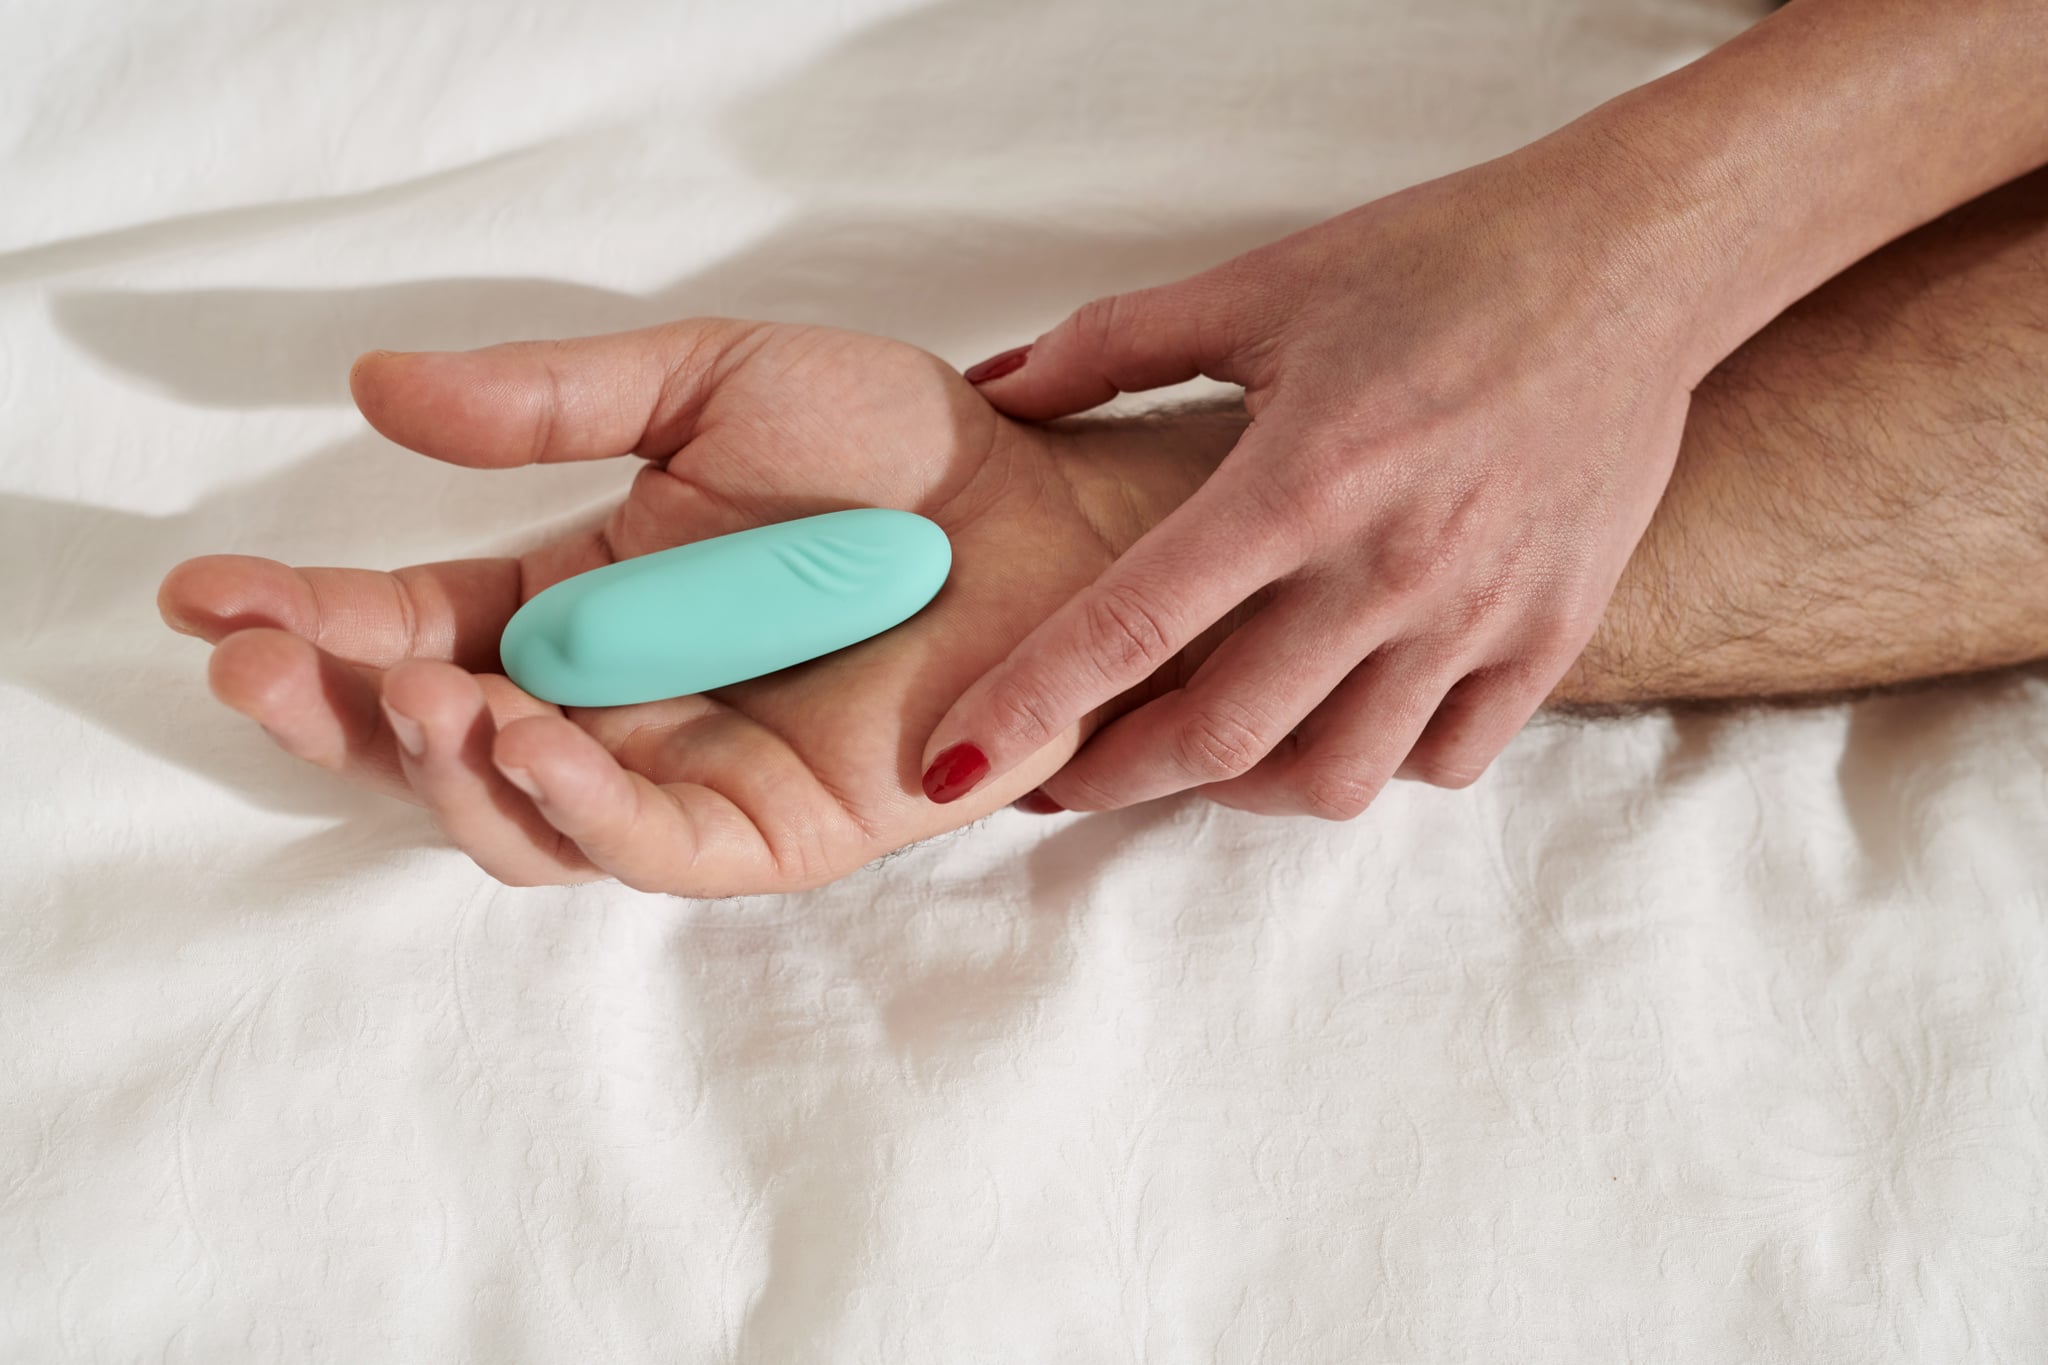 To Nine chaos capture How to Use a Vibrator on Your Partner | POPSUGAR Love & Sex